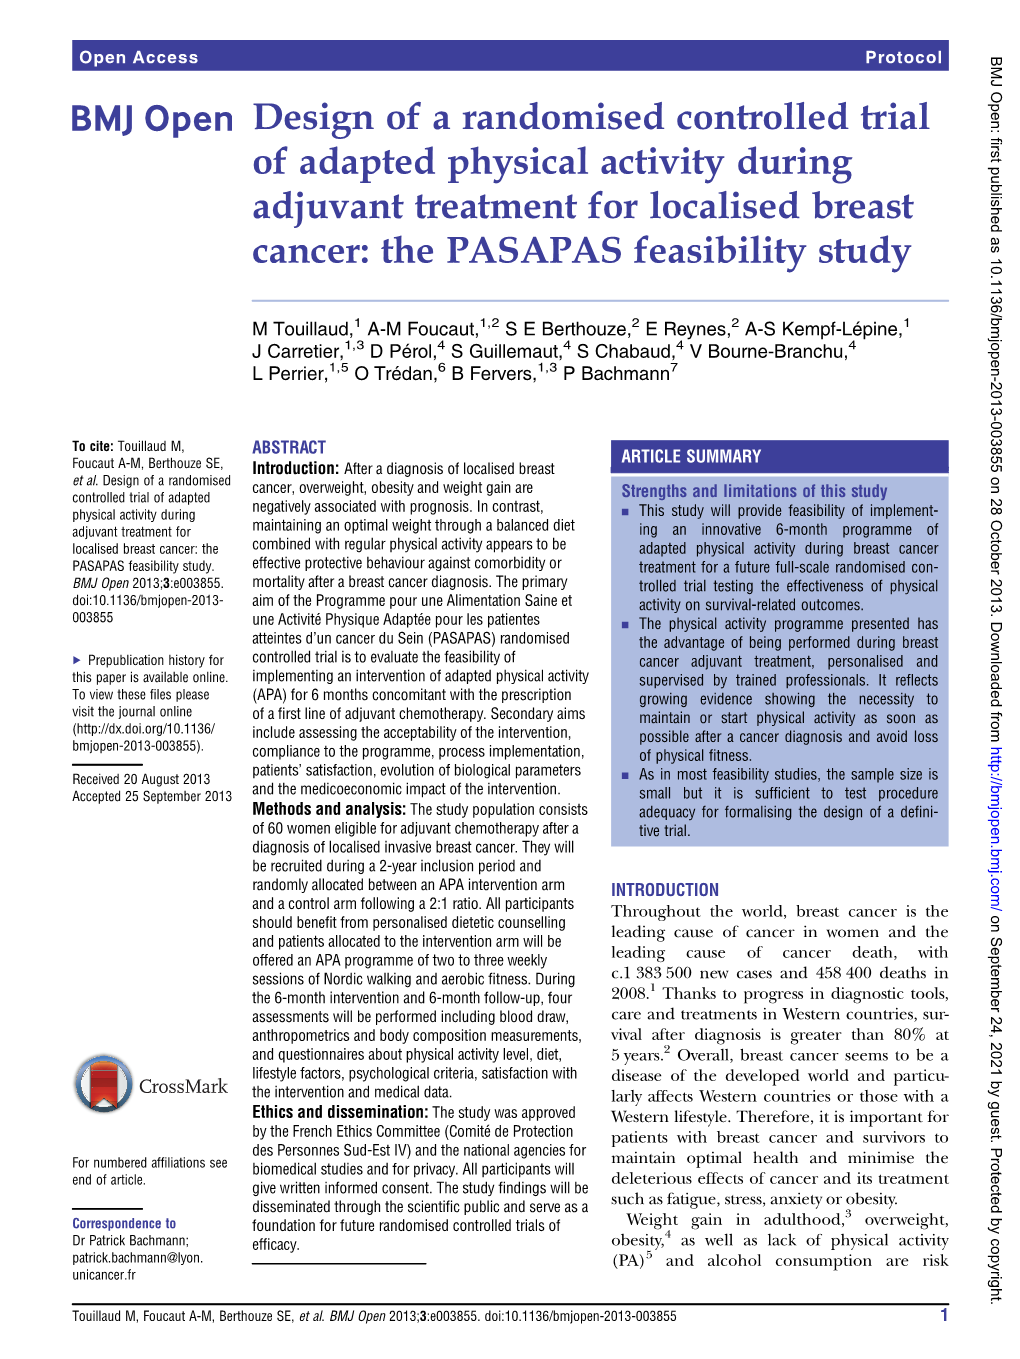 Design of a Randomised Controlled Trial of Adapted Physical Activity During Adjuvant Treatment for Localised Breast Cancer: the PASAPAS Feasibility Study